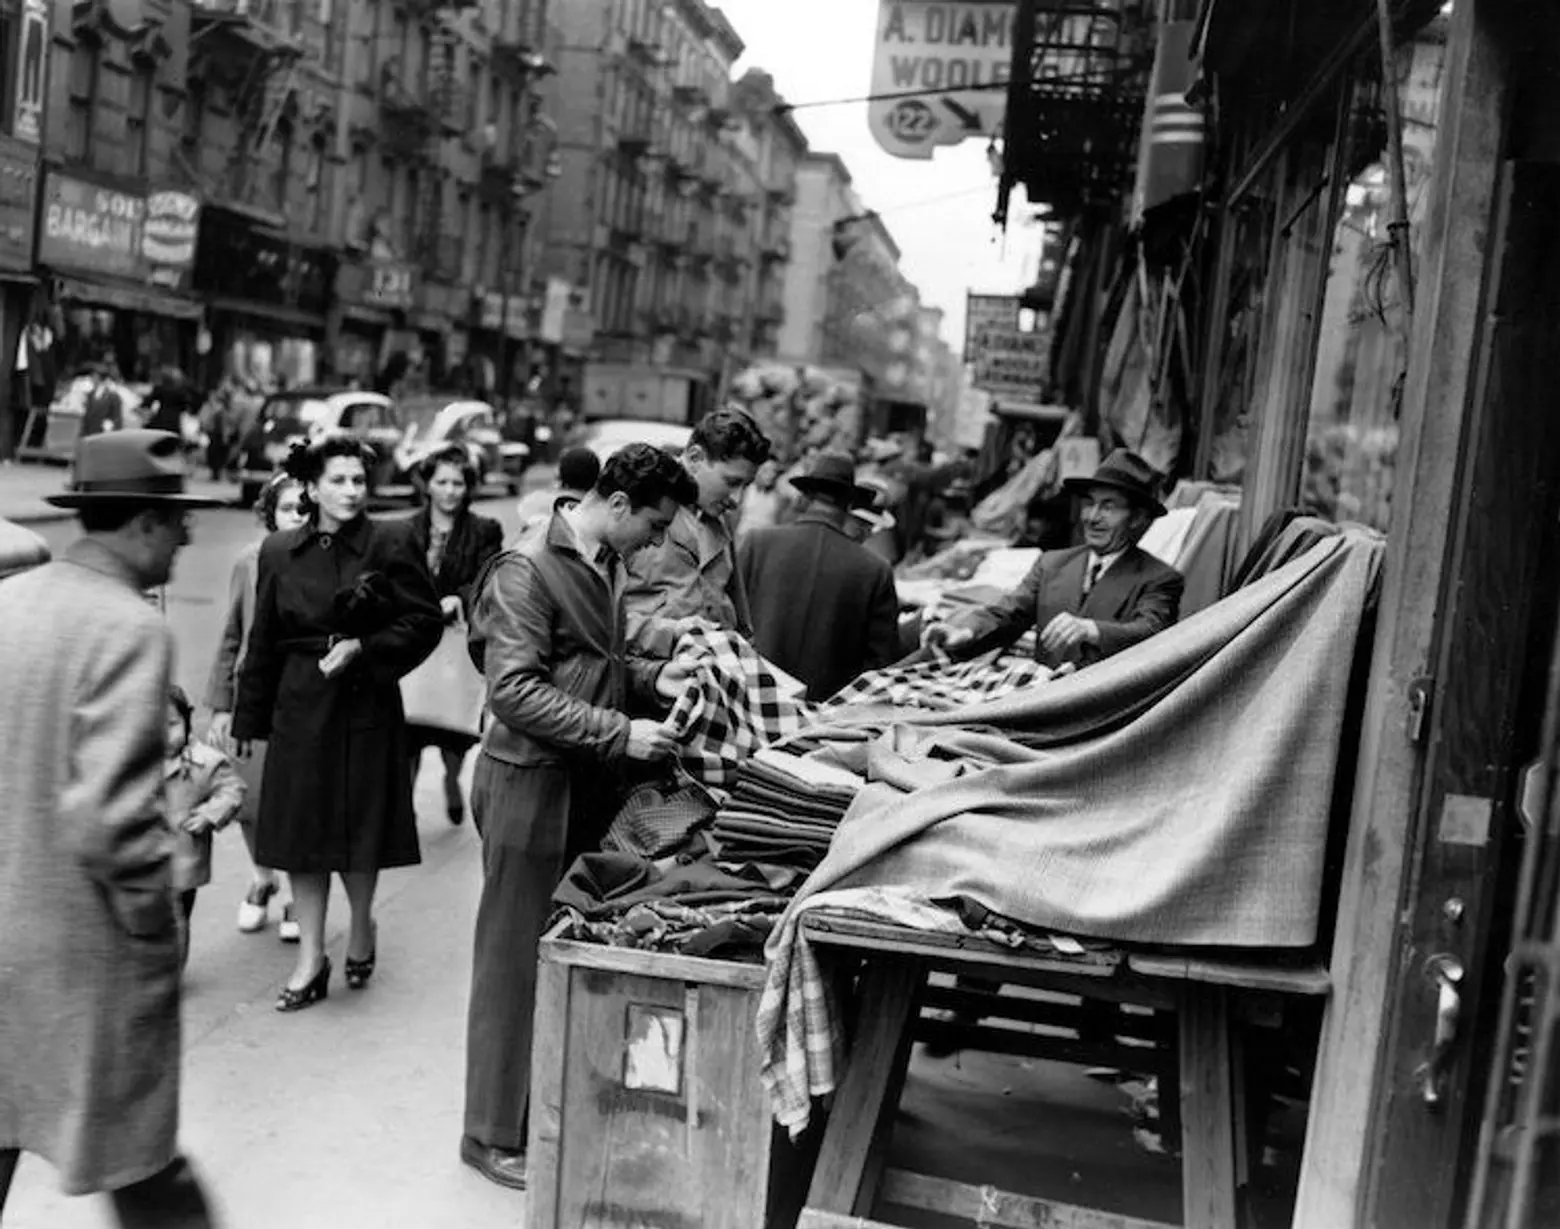 The Urban Lens: Vintage NYC photos show everyday life in the 1940s